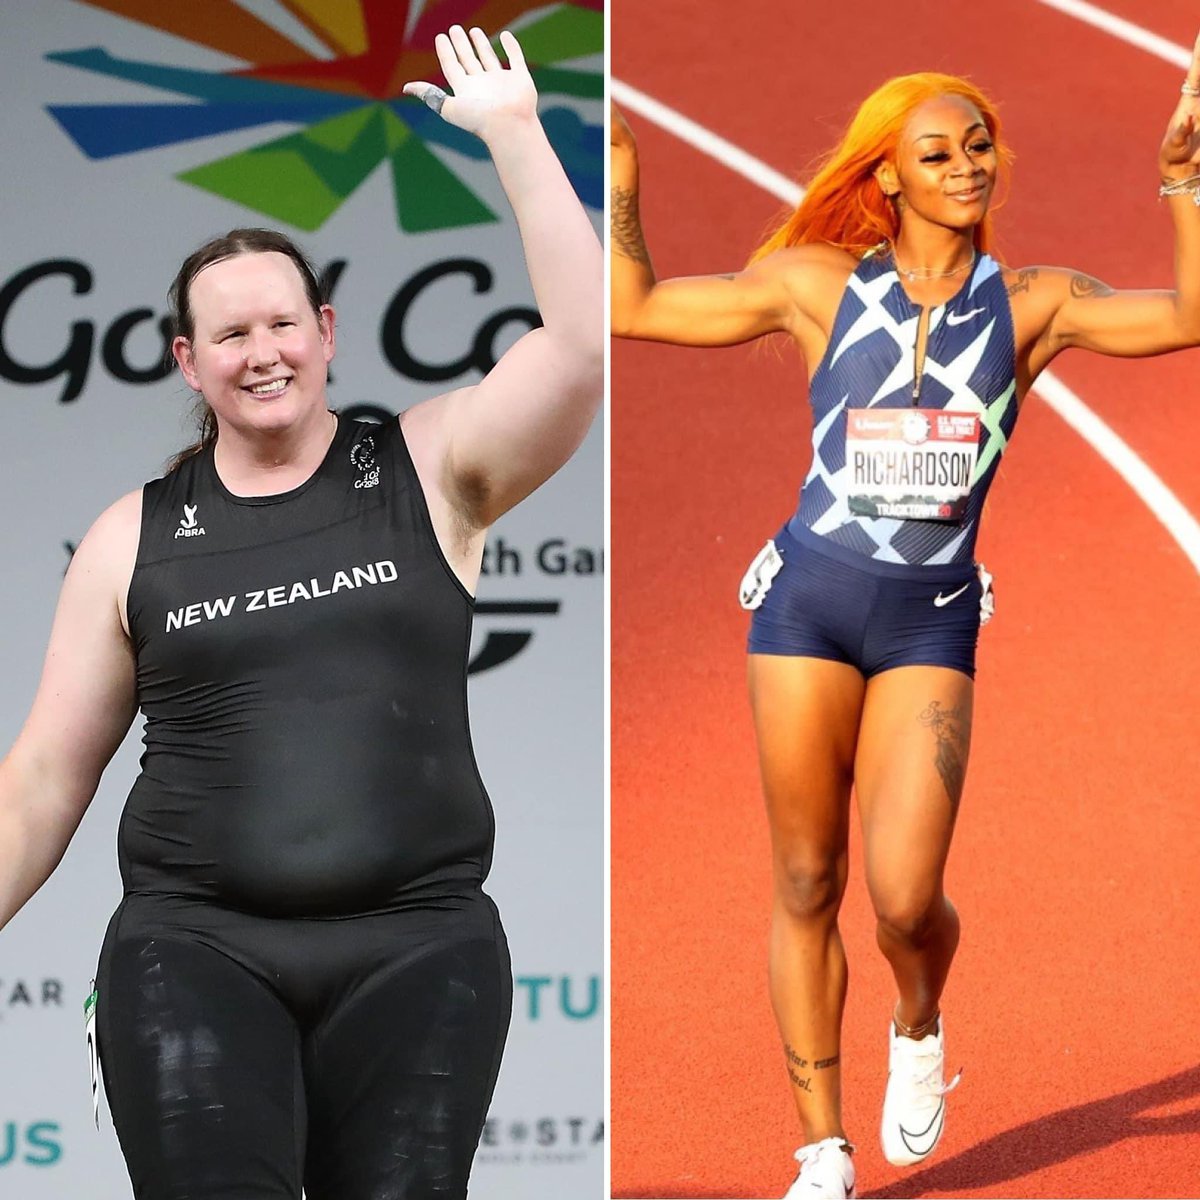 One is a biological man and is allowed to compete in the women’s olympics in weightlifting, and the other is being docked for marijuana use. 

It’s time for a discussion.